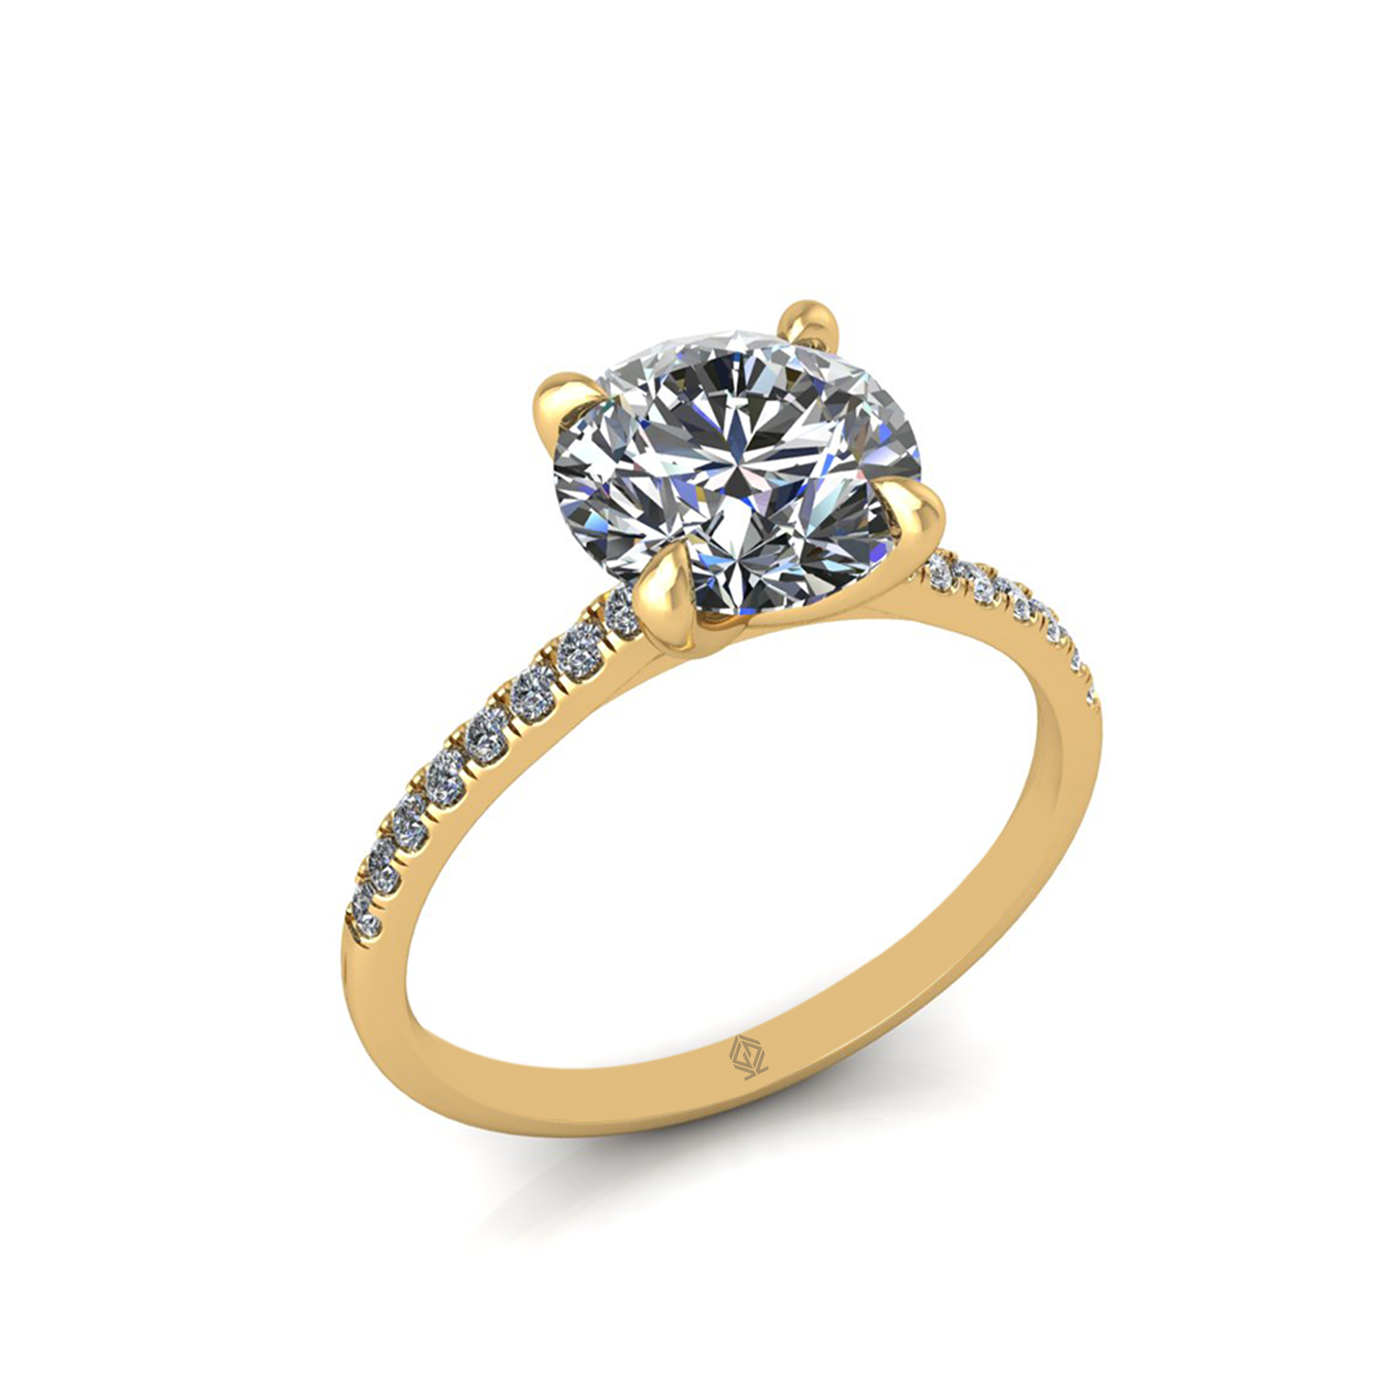 18k yellow gold 2.0ct 4 prongs round cut diamond engagement ring with whisper thin pavÉ set band